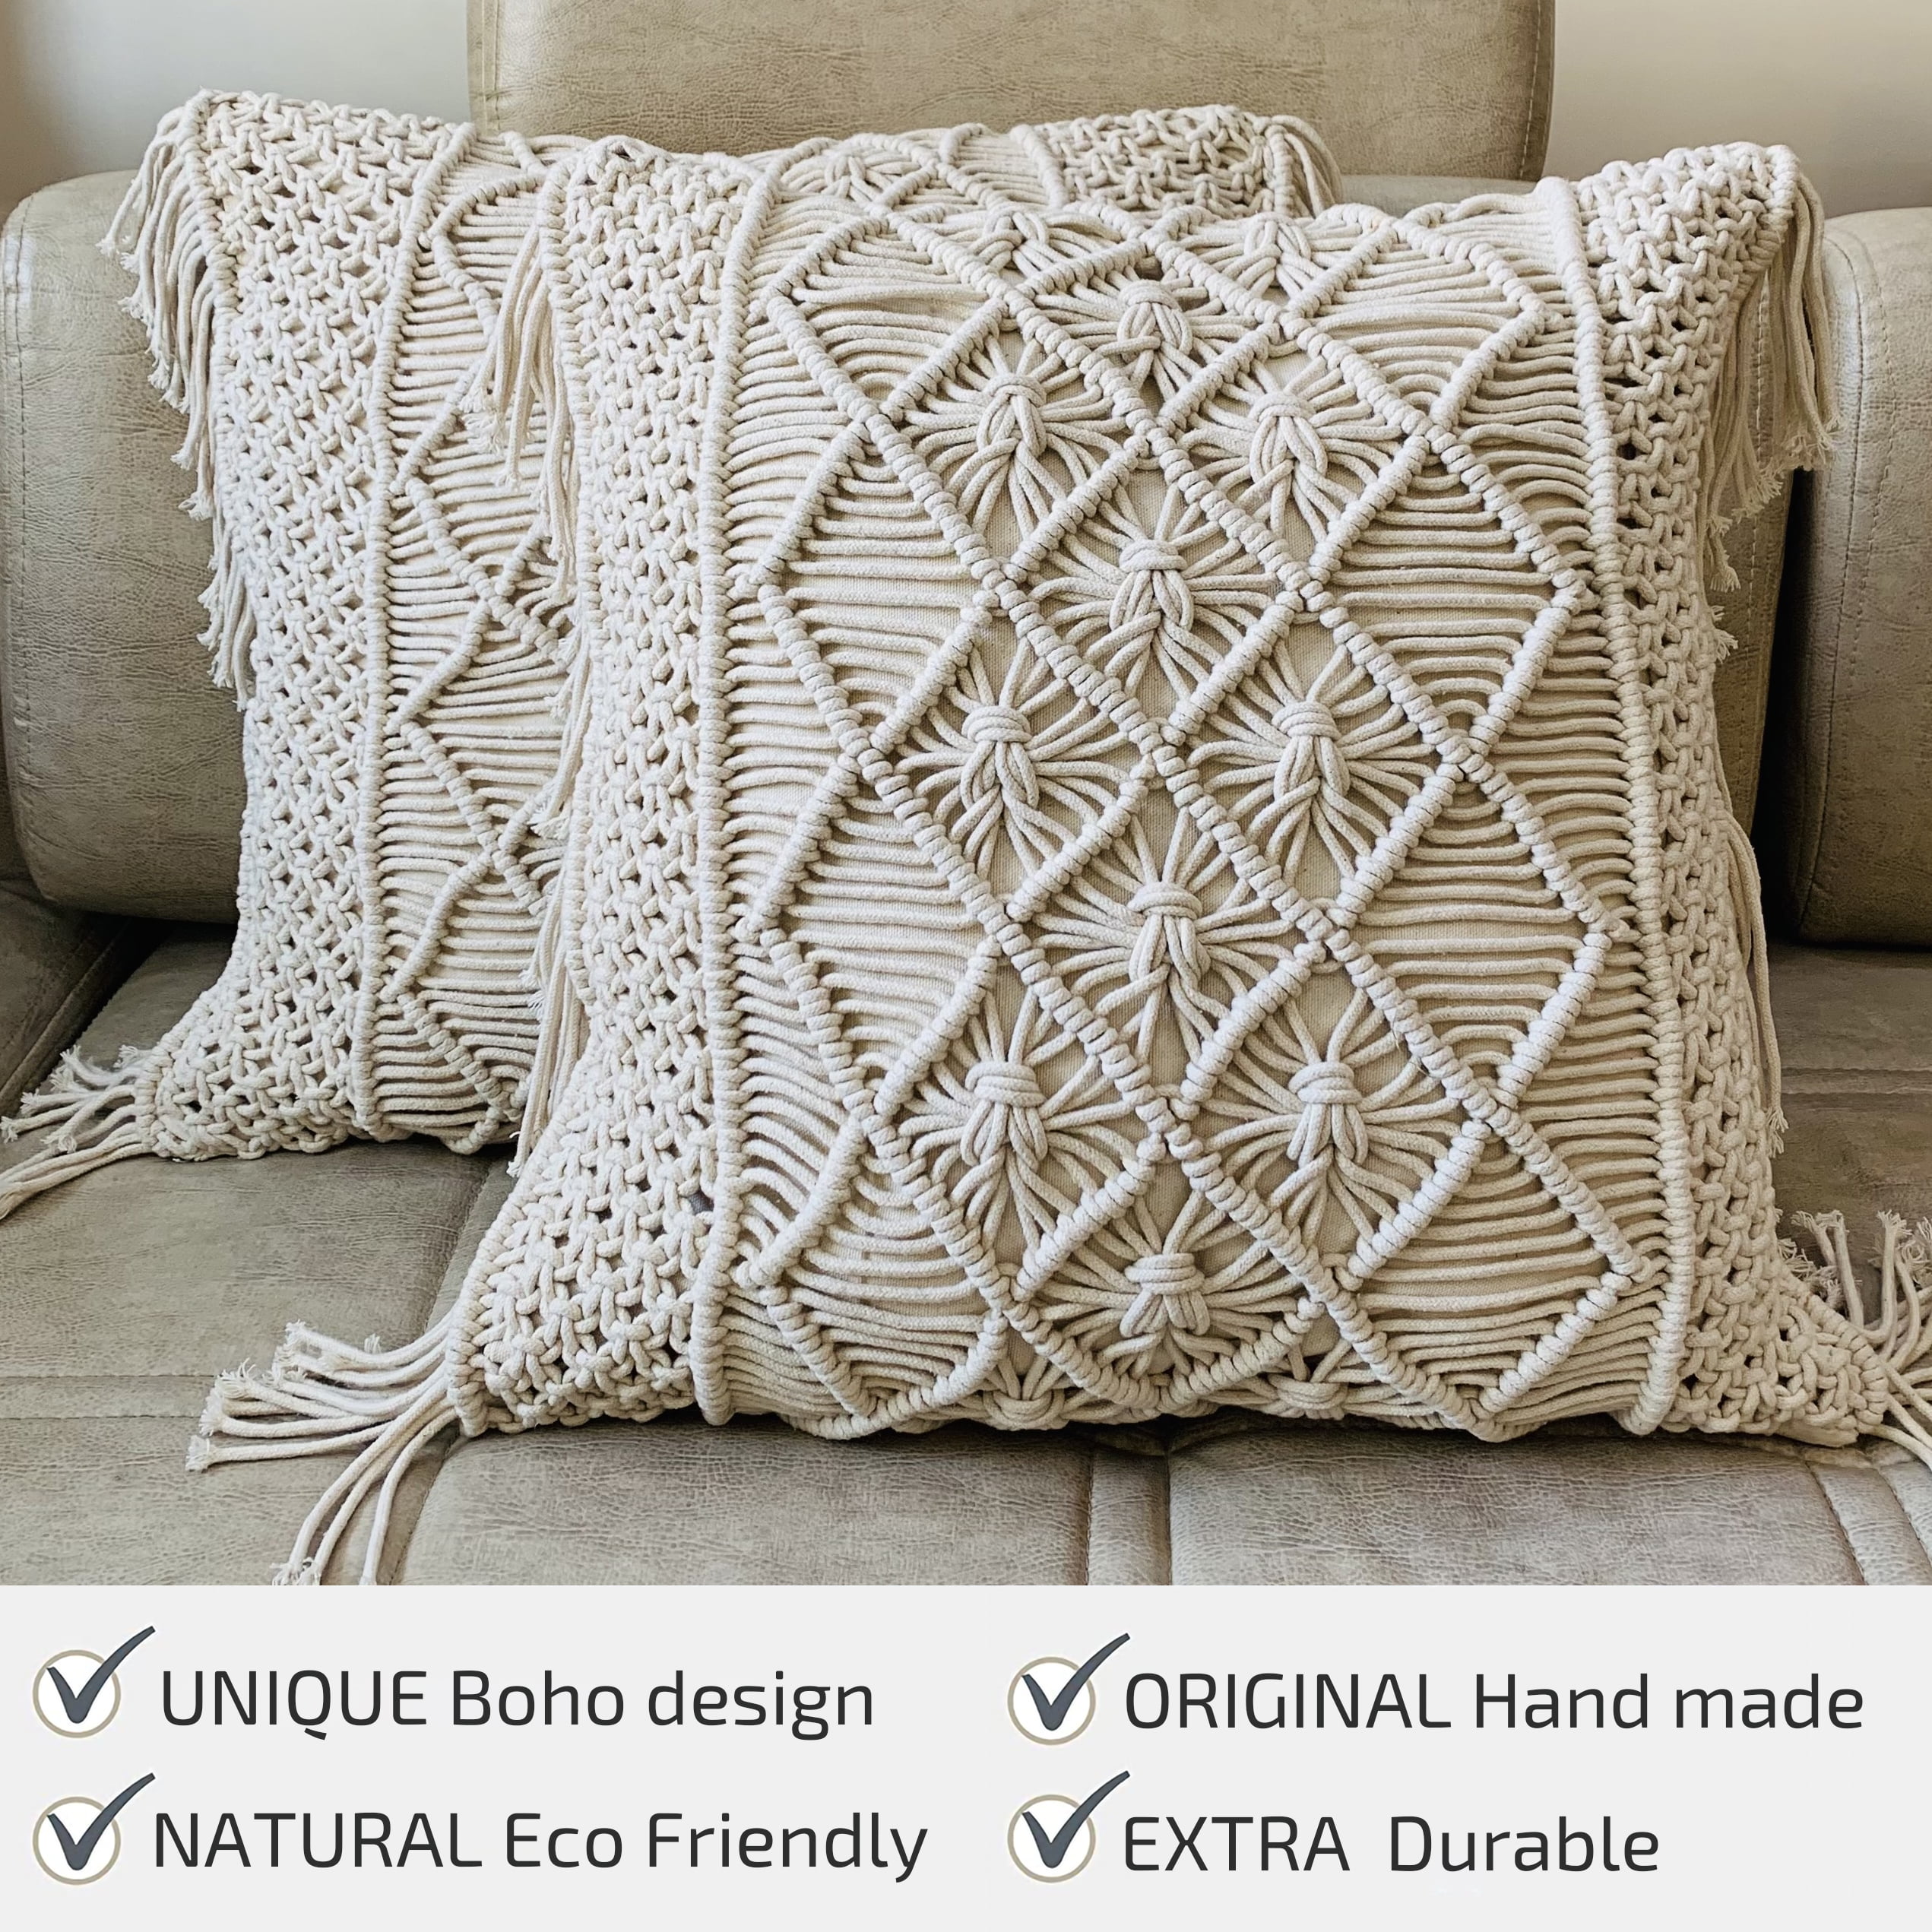  Booque Valley Pack of 2 Decorative Throw Pillow Covers, Ultra  Soft Modern Braid Patterned Square White Cushion Covers Giant Stretchy  Pillow Cases for Sofa Couch Bedroom(22 x 22 inch, Grey Blue) 